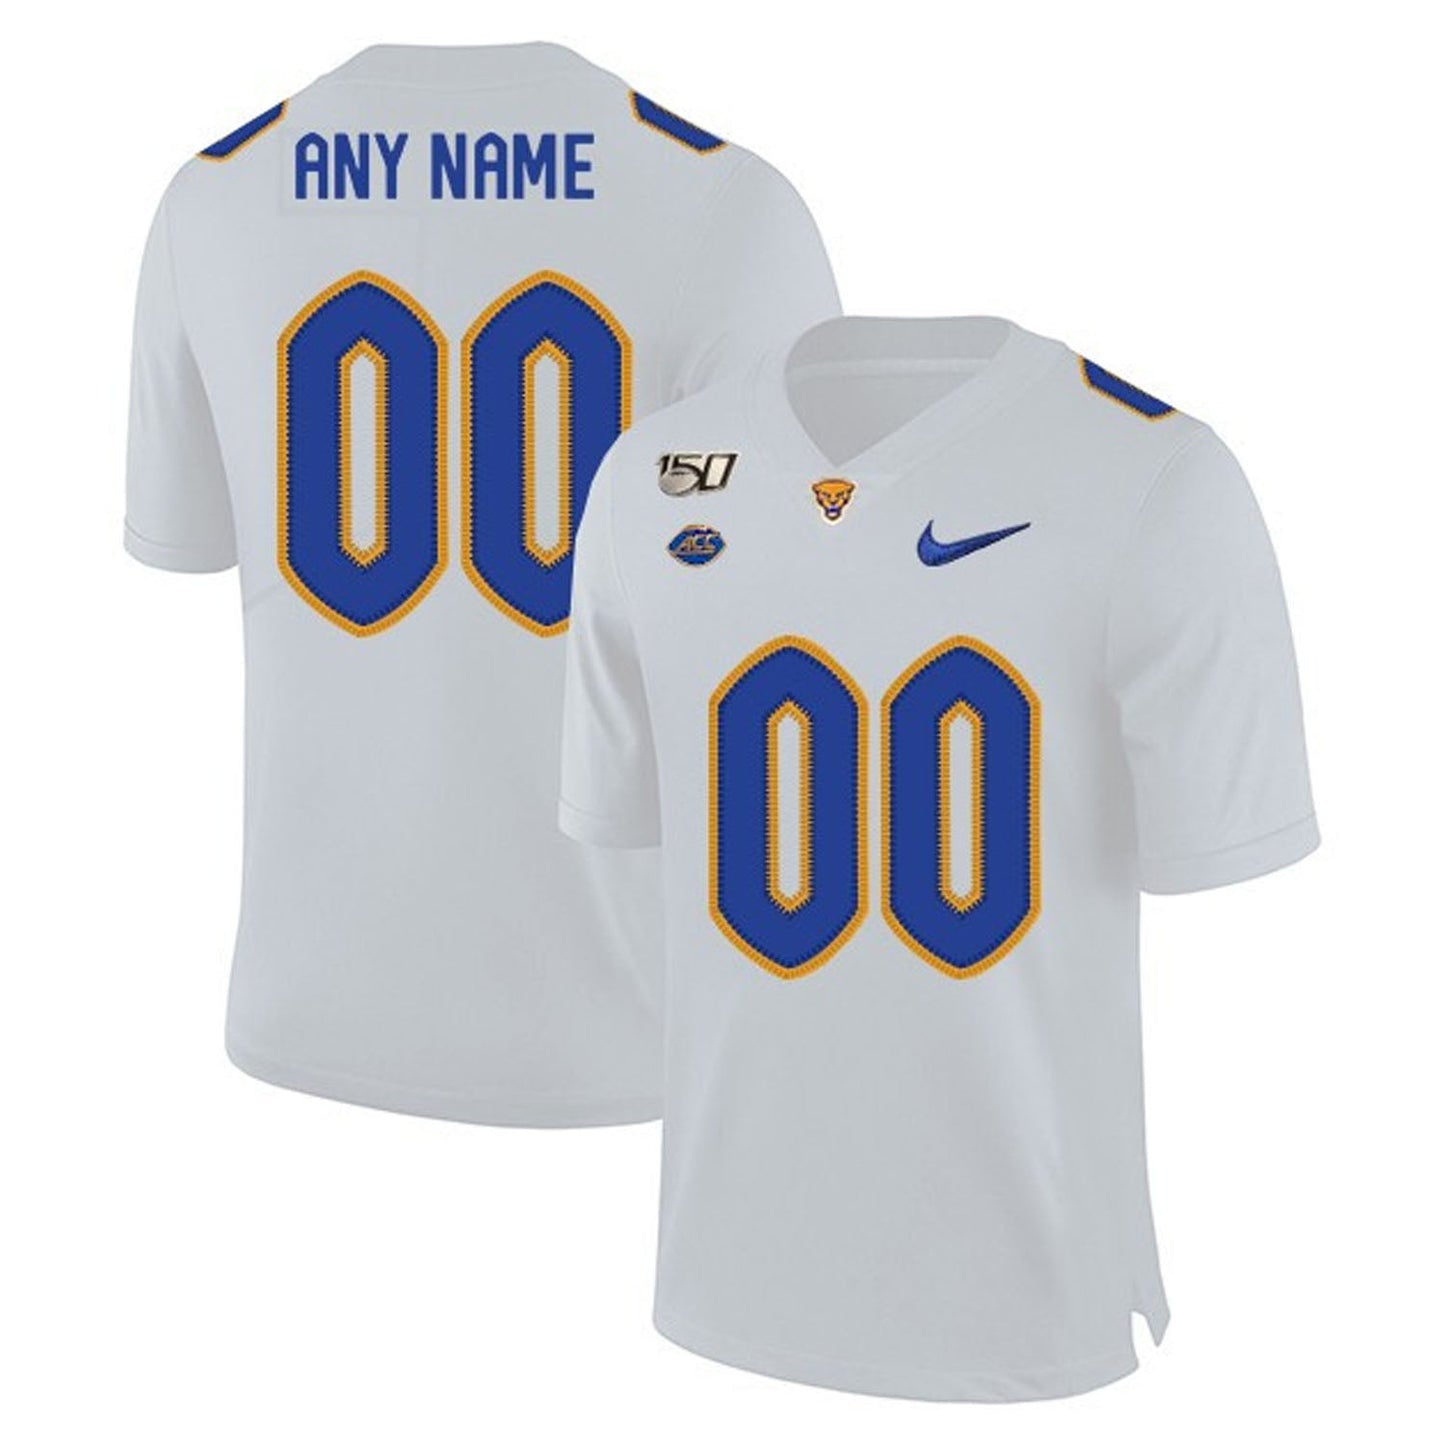 NCAAF Pittsburgh Panthers Custom Jersey